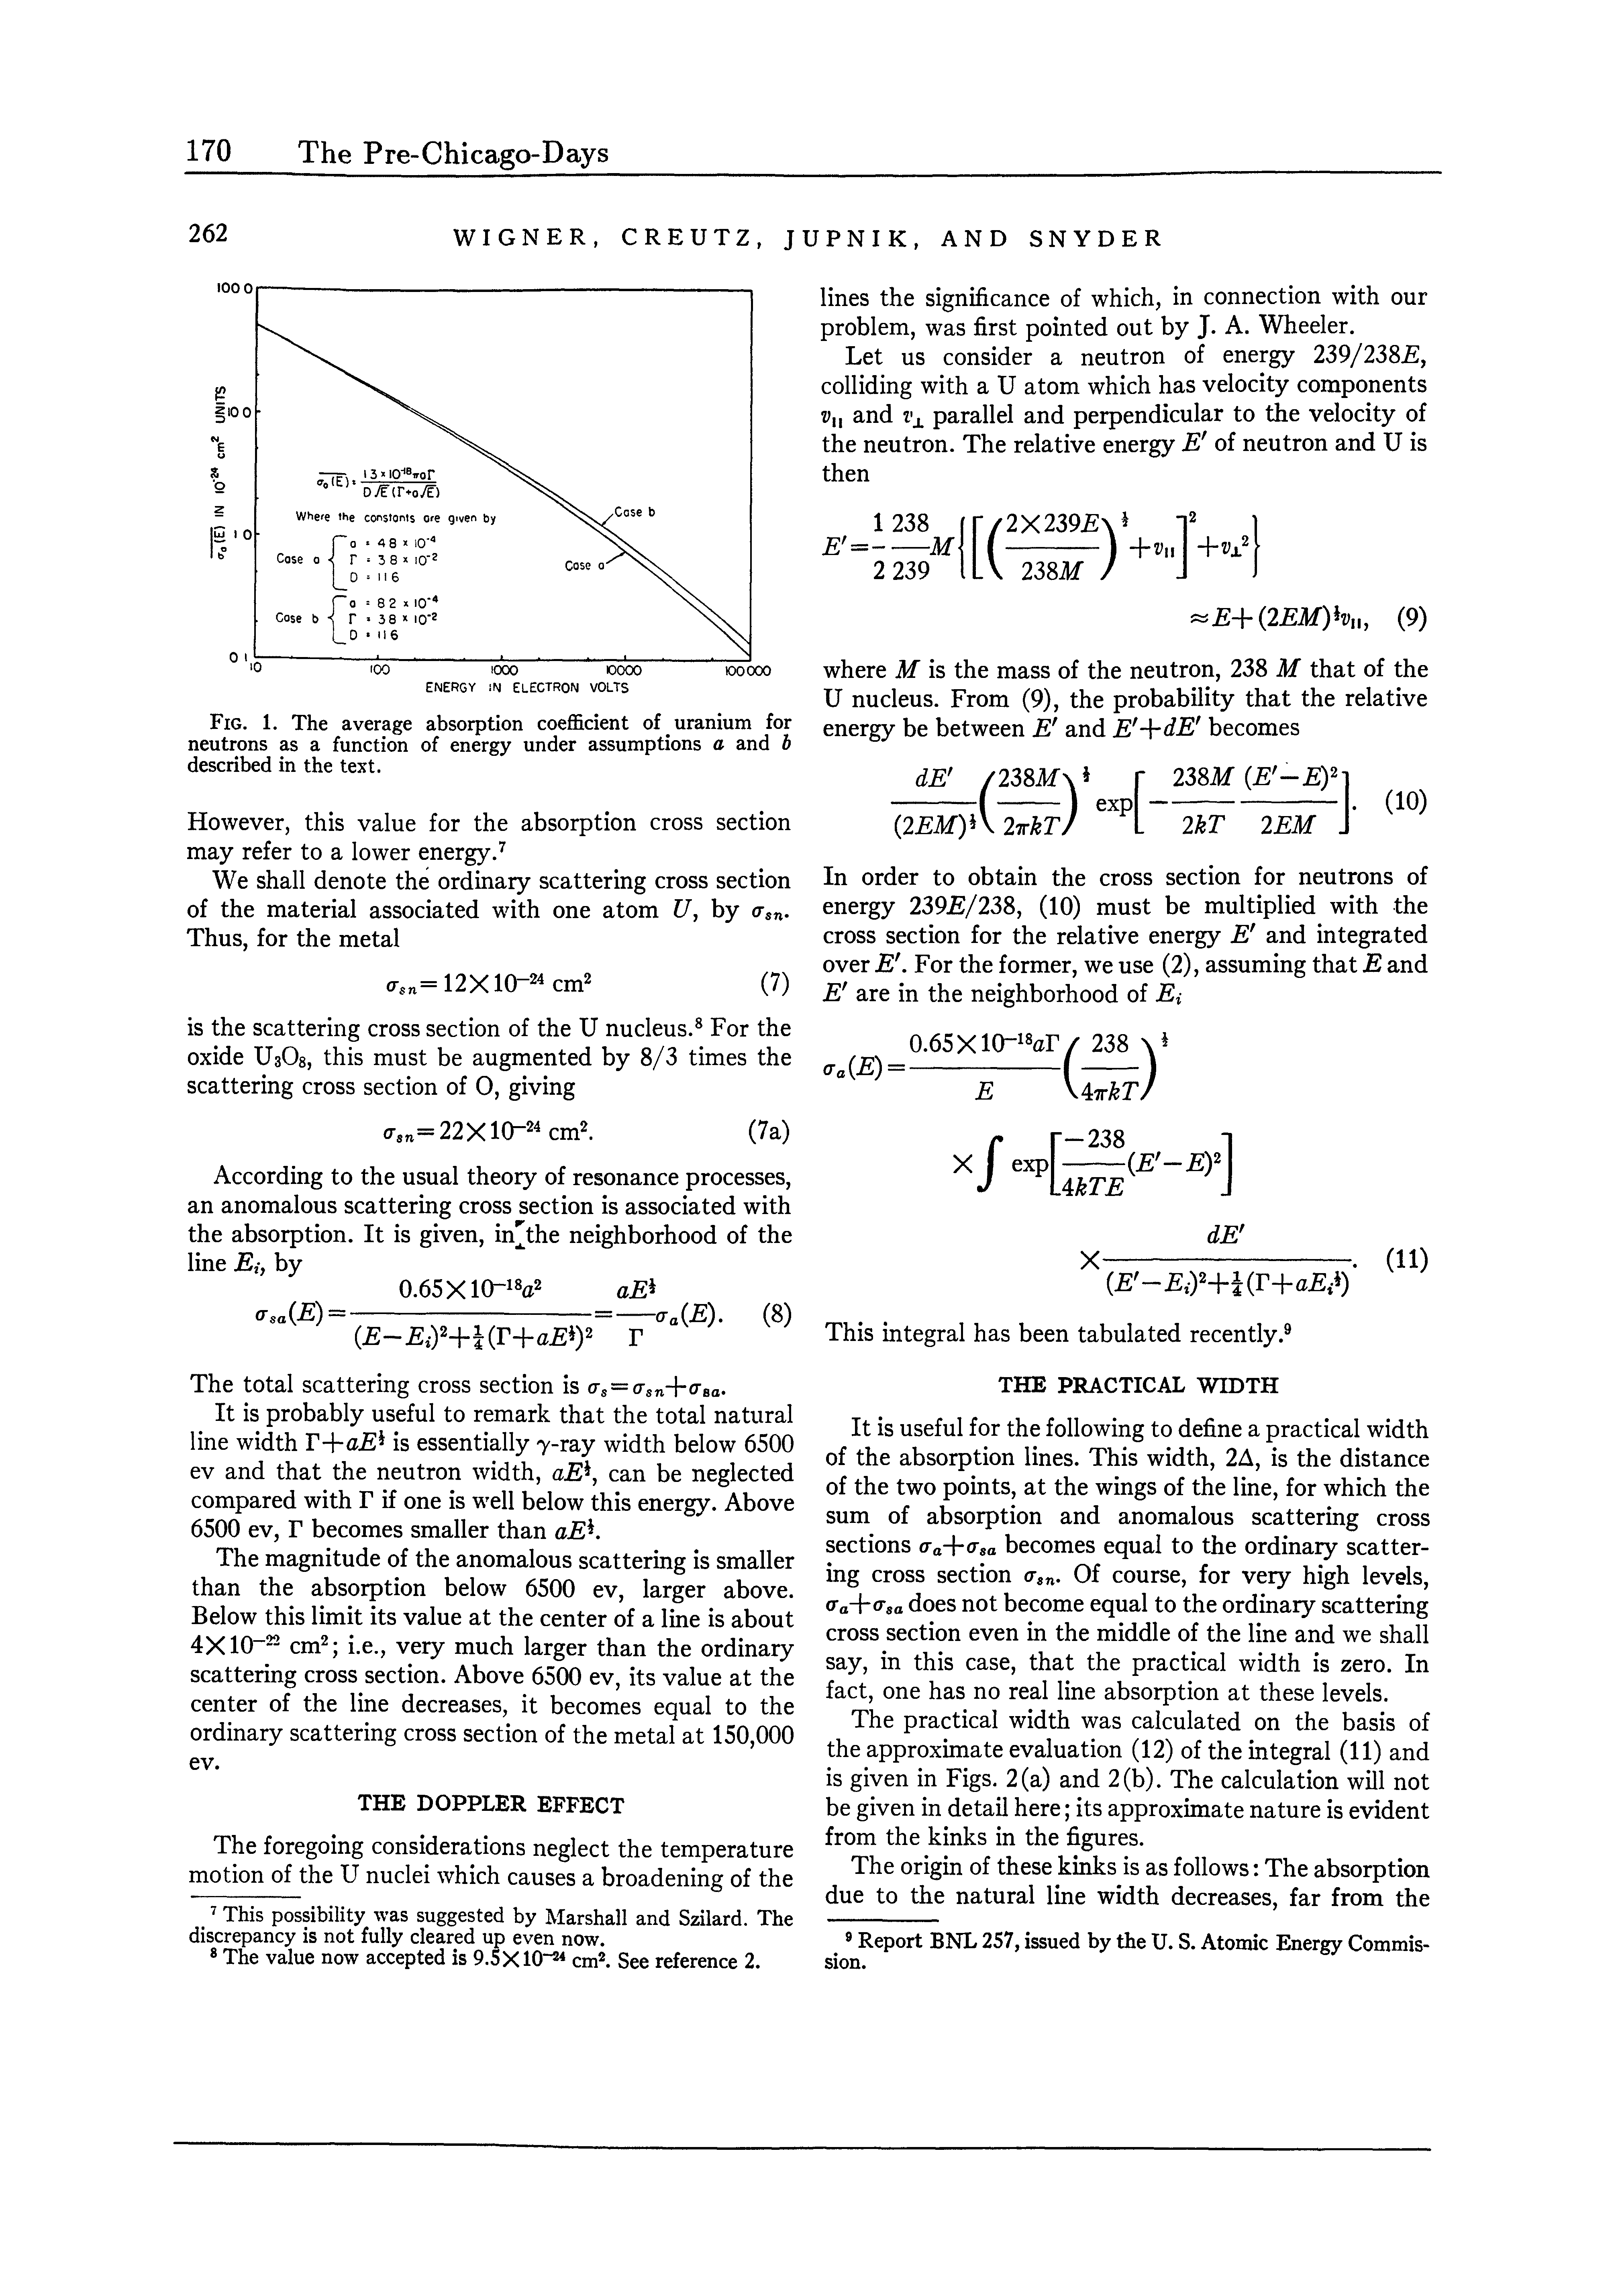 Fig. 1. The average absorption coefficient of uranium for neutrons as a function of energy under assumptions a and 6 described in the text.